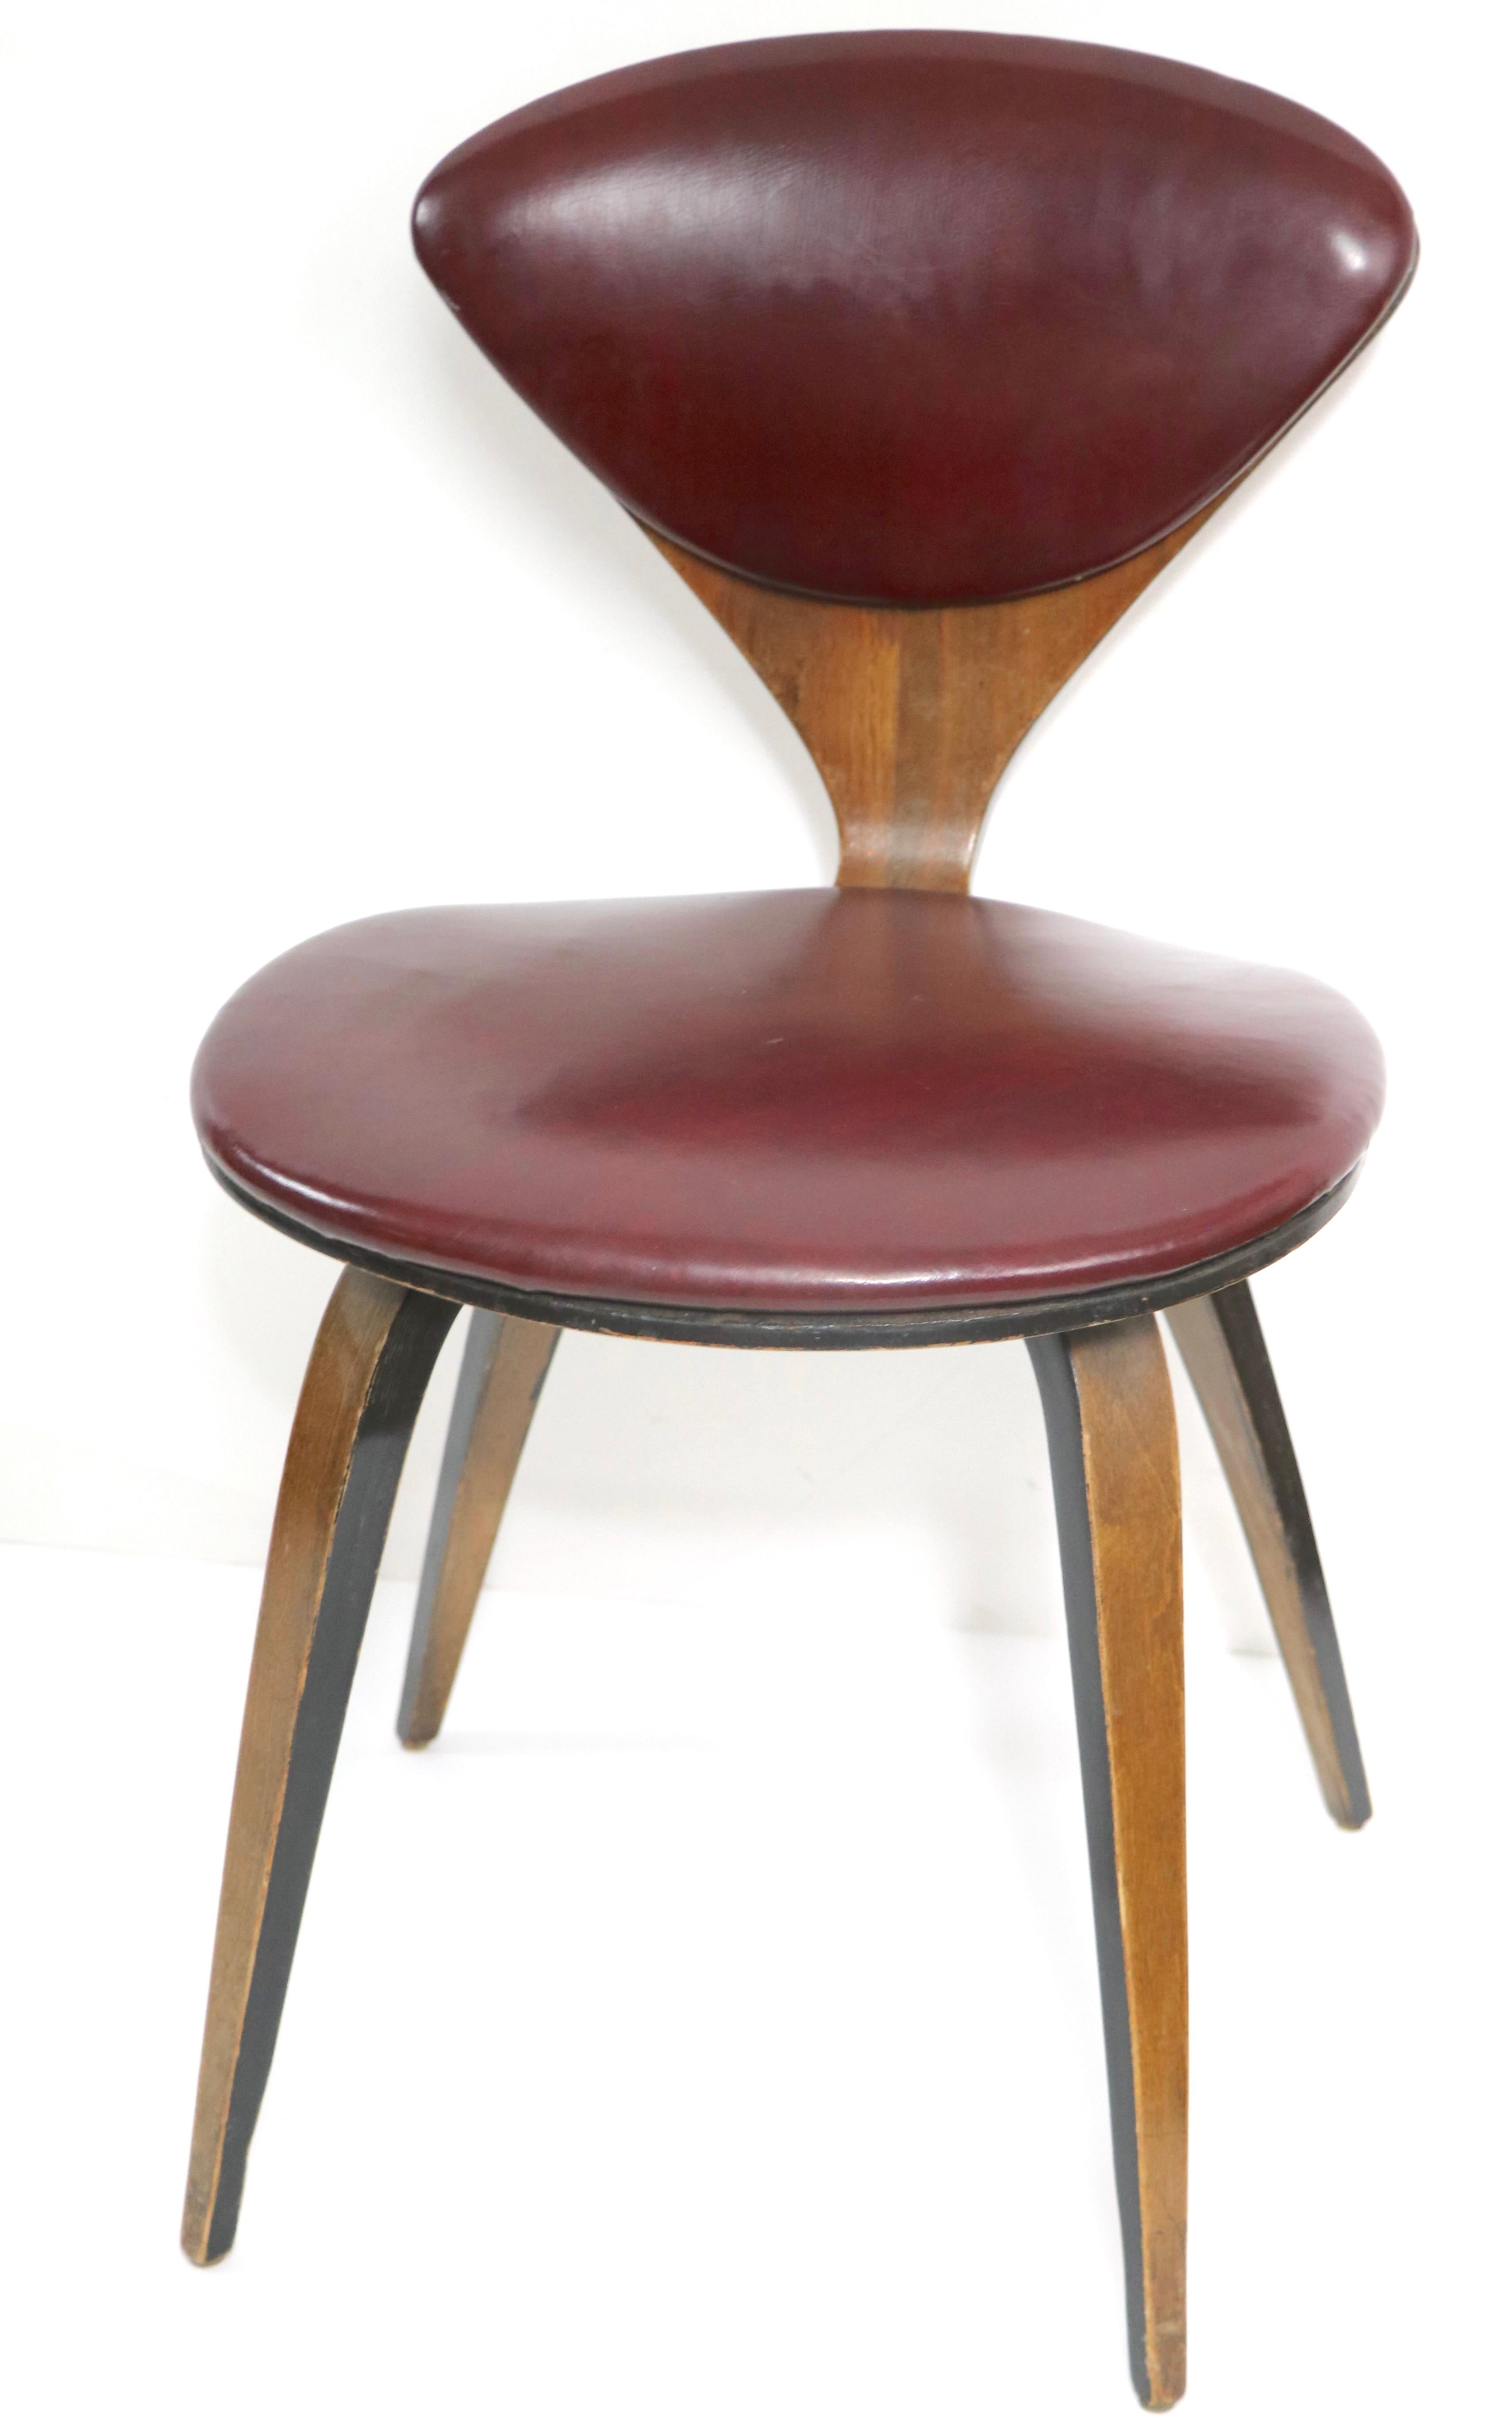 Iconic Mid Century Cherner Plycraft Bent Ply Chair For Sale 2